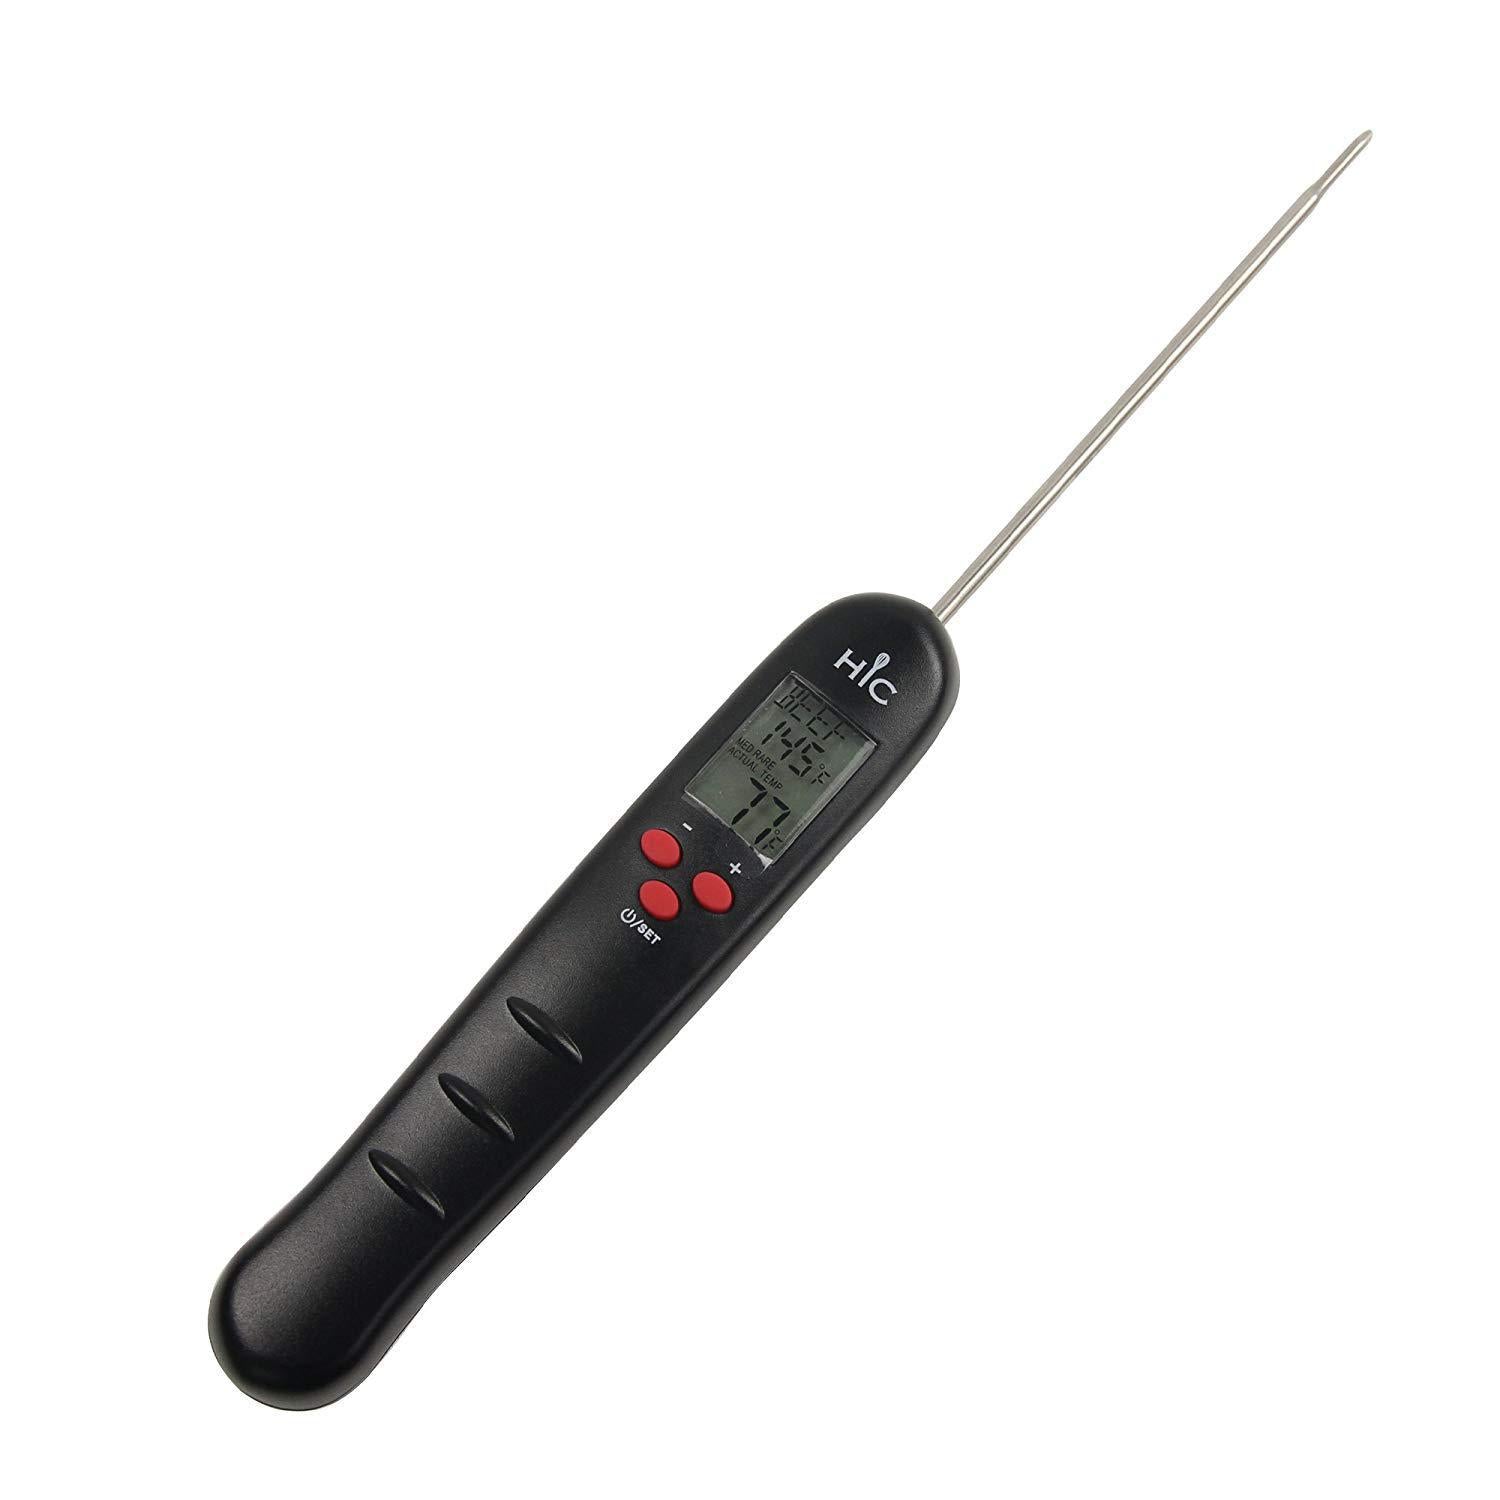 Cdn Large Instant Read Meat And Poultry Roasting Thermometer : Target